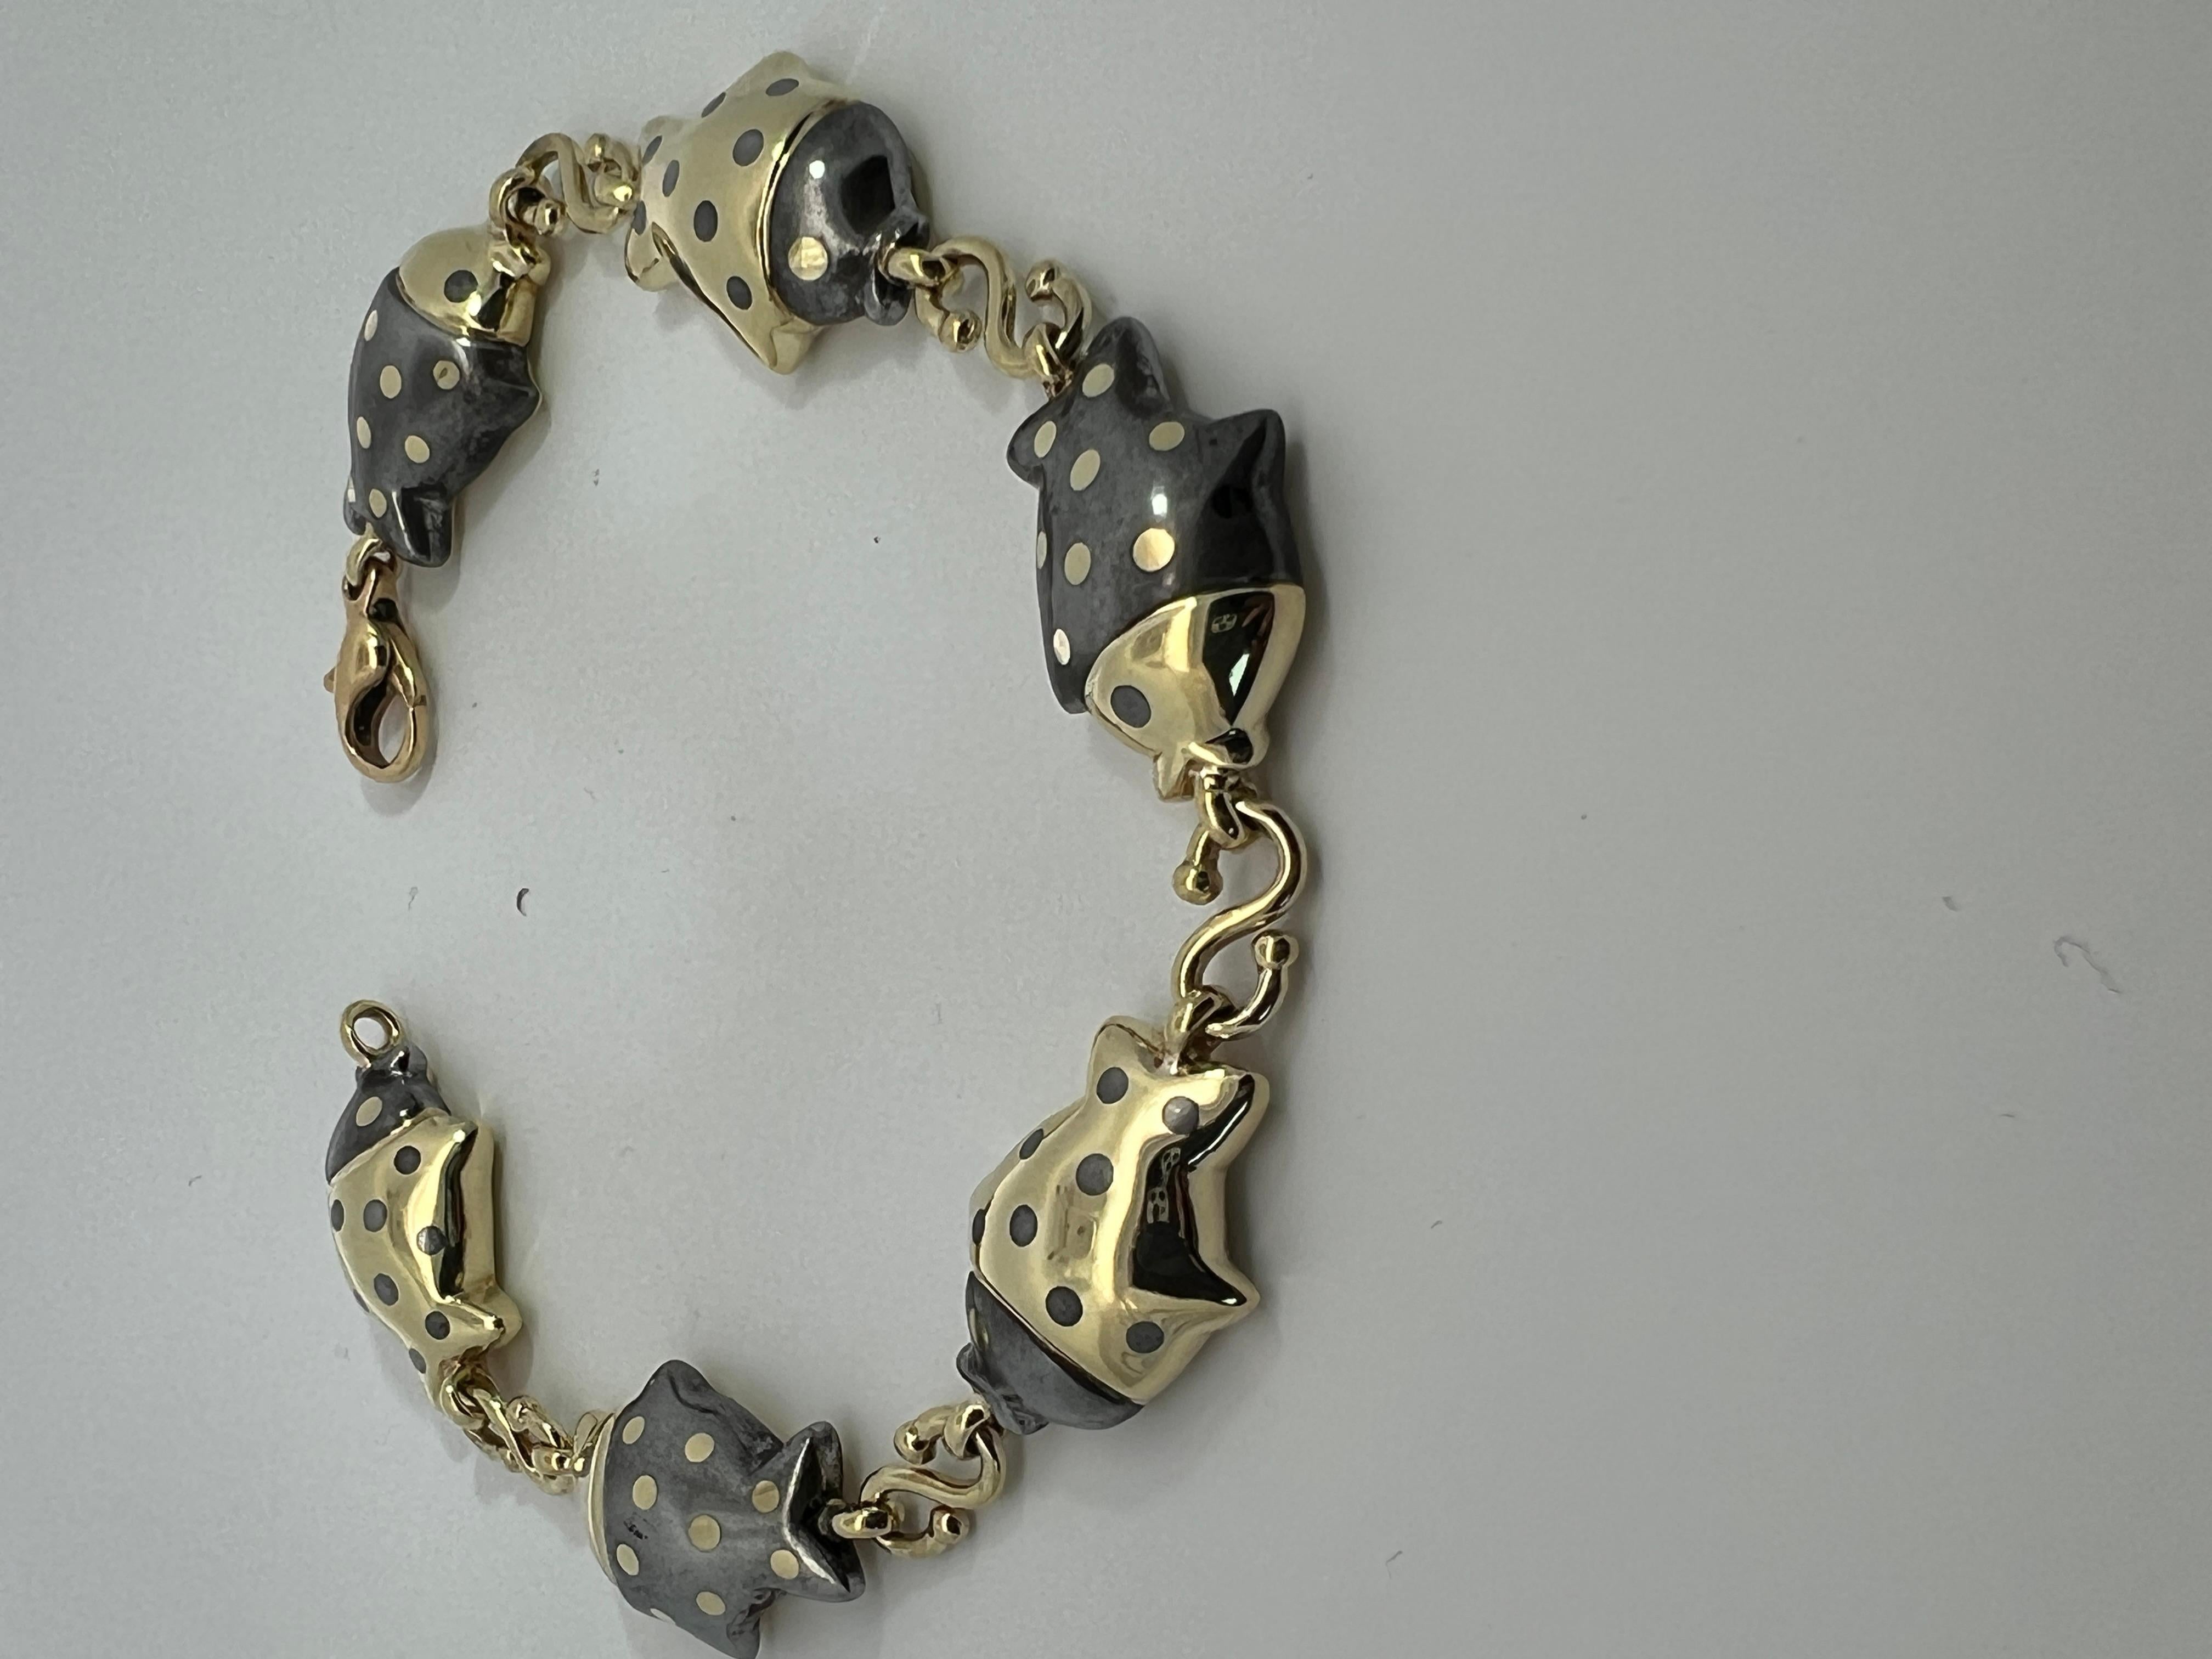 An 18k yellow gold and Hematite bracelet by Faraone / Tiffany & Co. For Sale 1